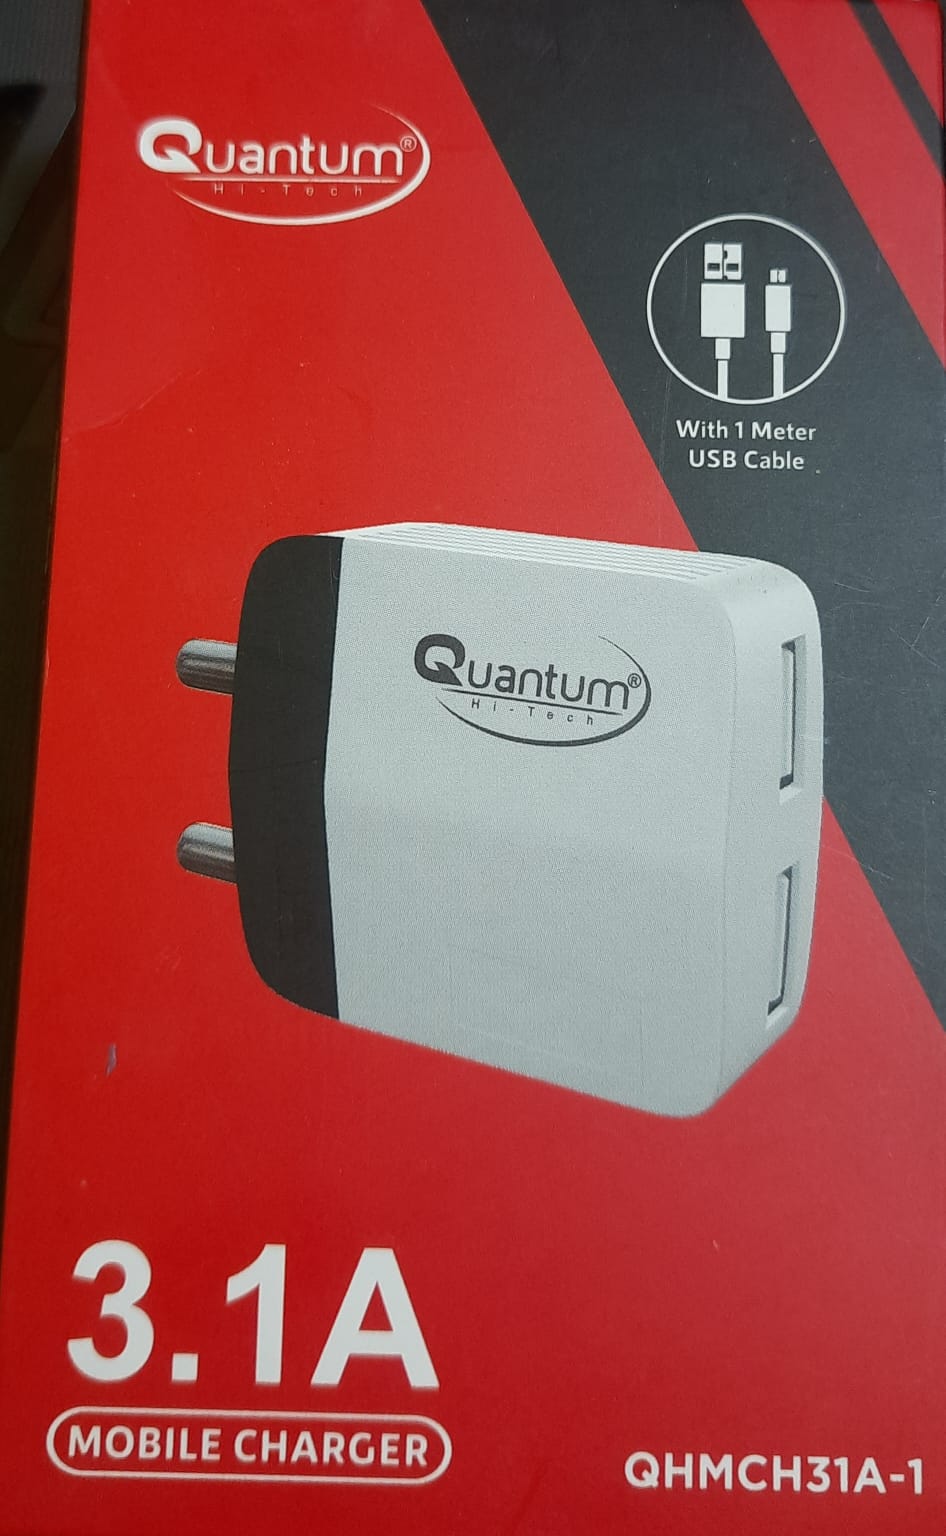 Quantum 3.1Amp Dual Port with USB Cable Fast Charging Mobile Charger 